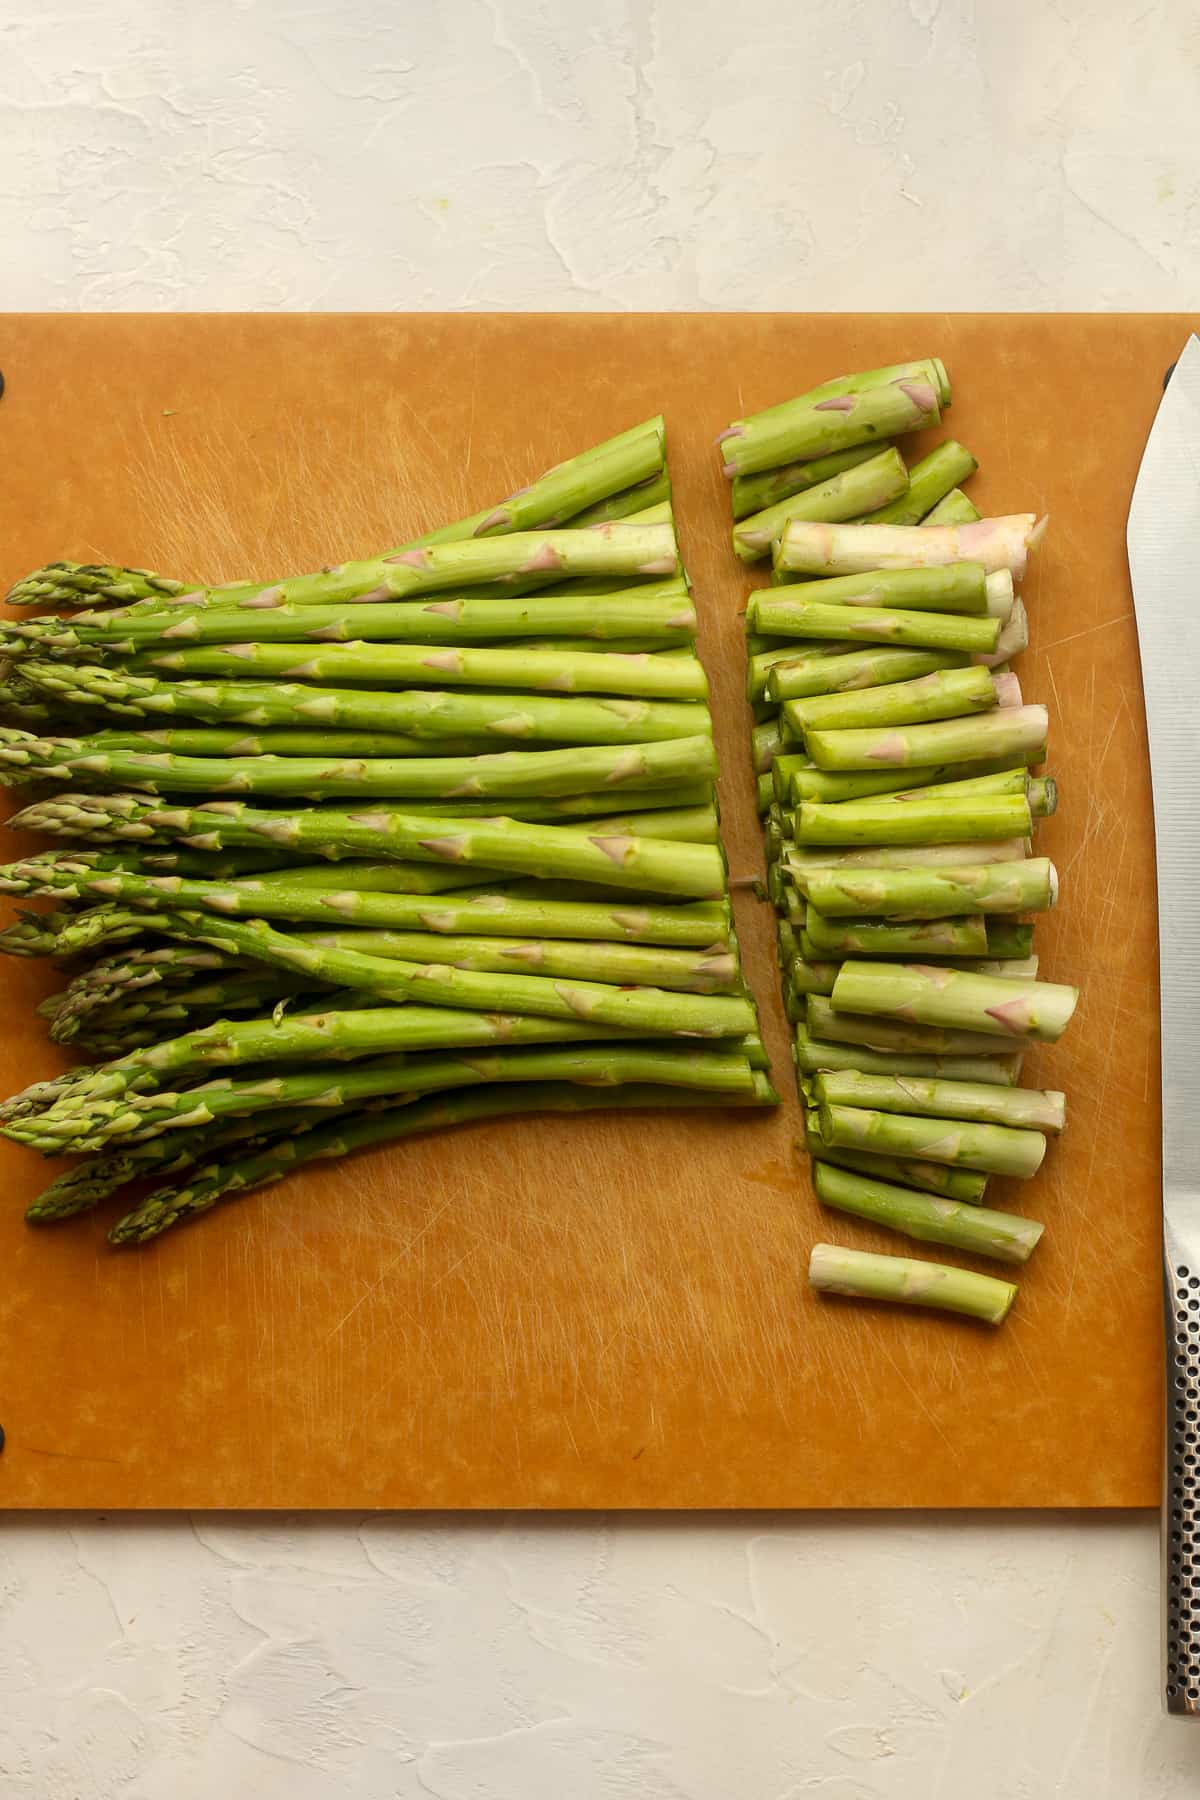 A cutting board of asparagus with the ends cut off.